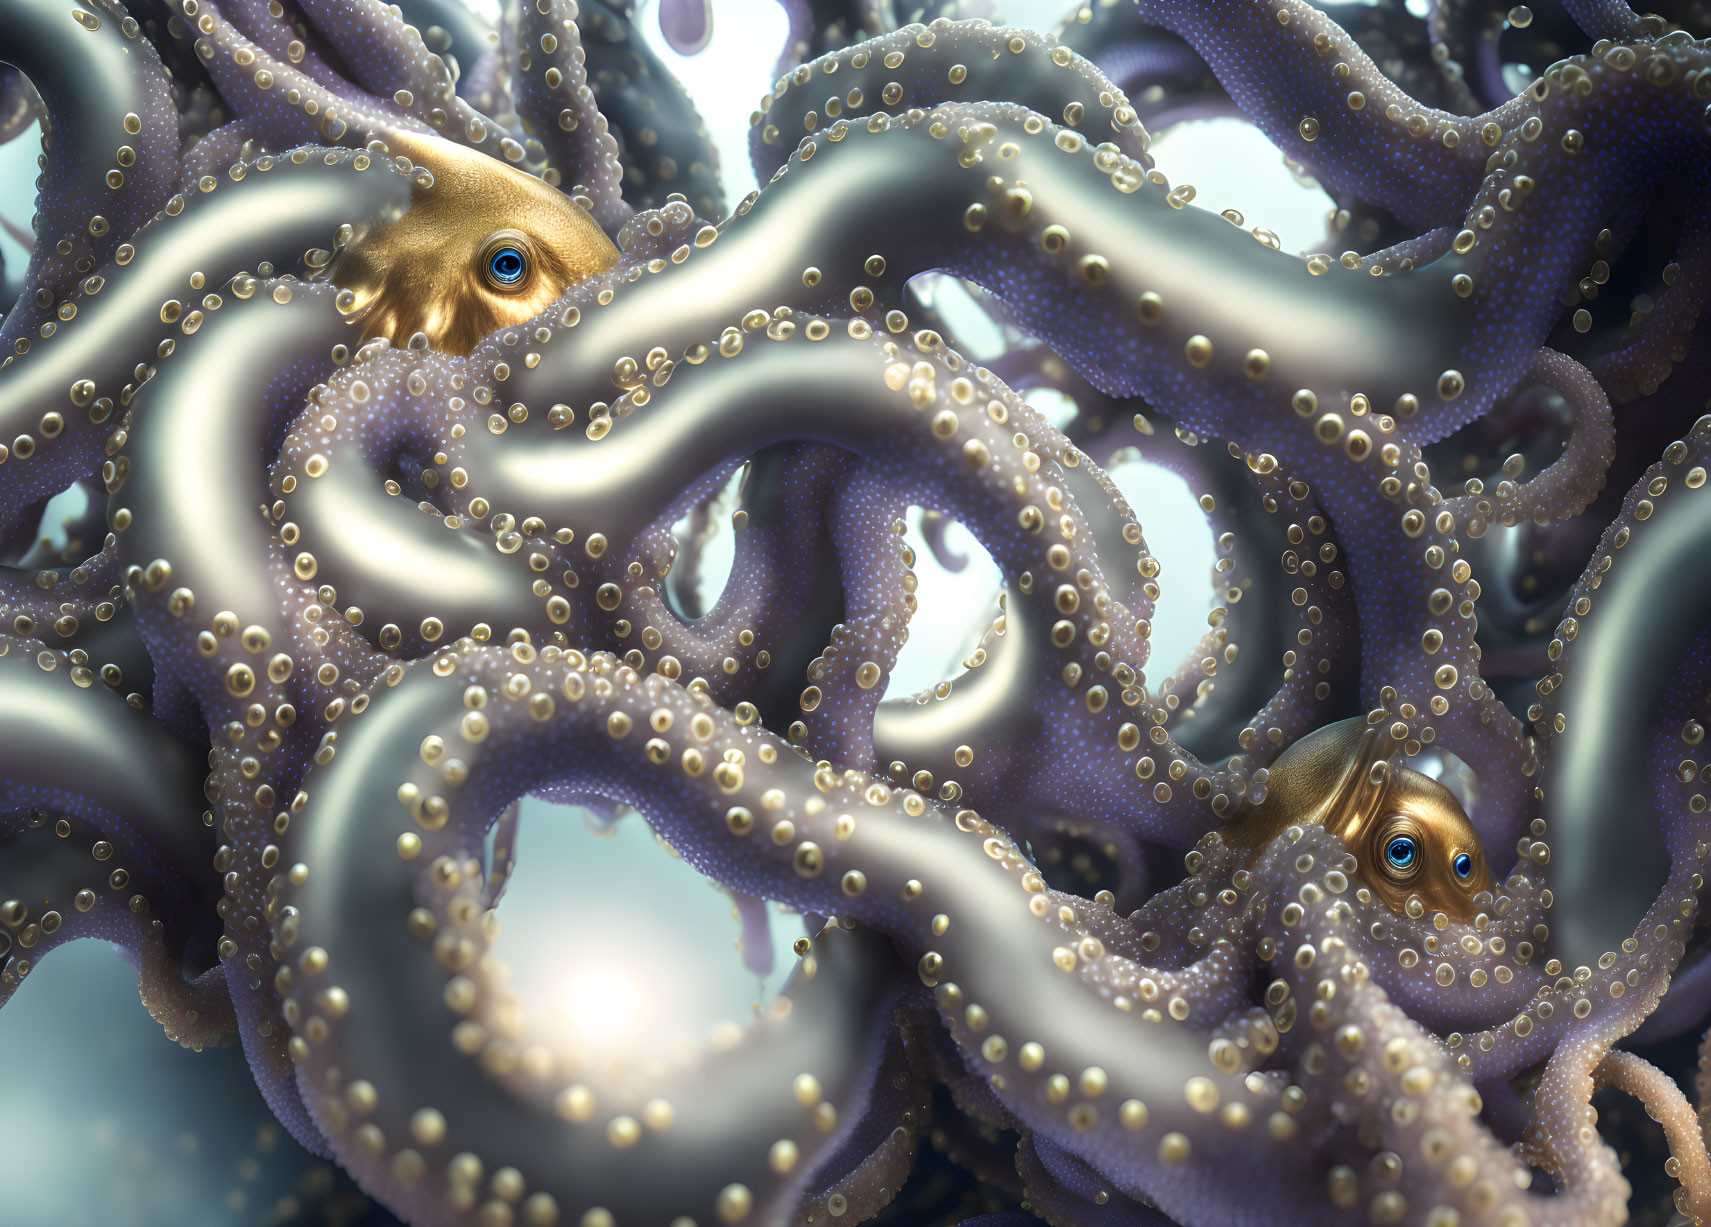 Detailed Octopus Tentacles with Suckers and Eyes